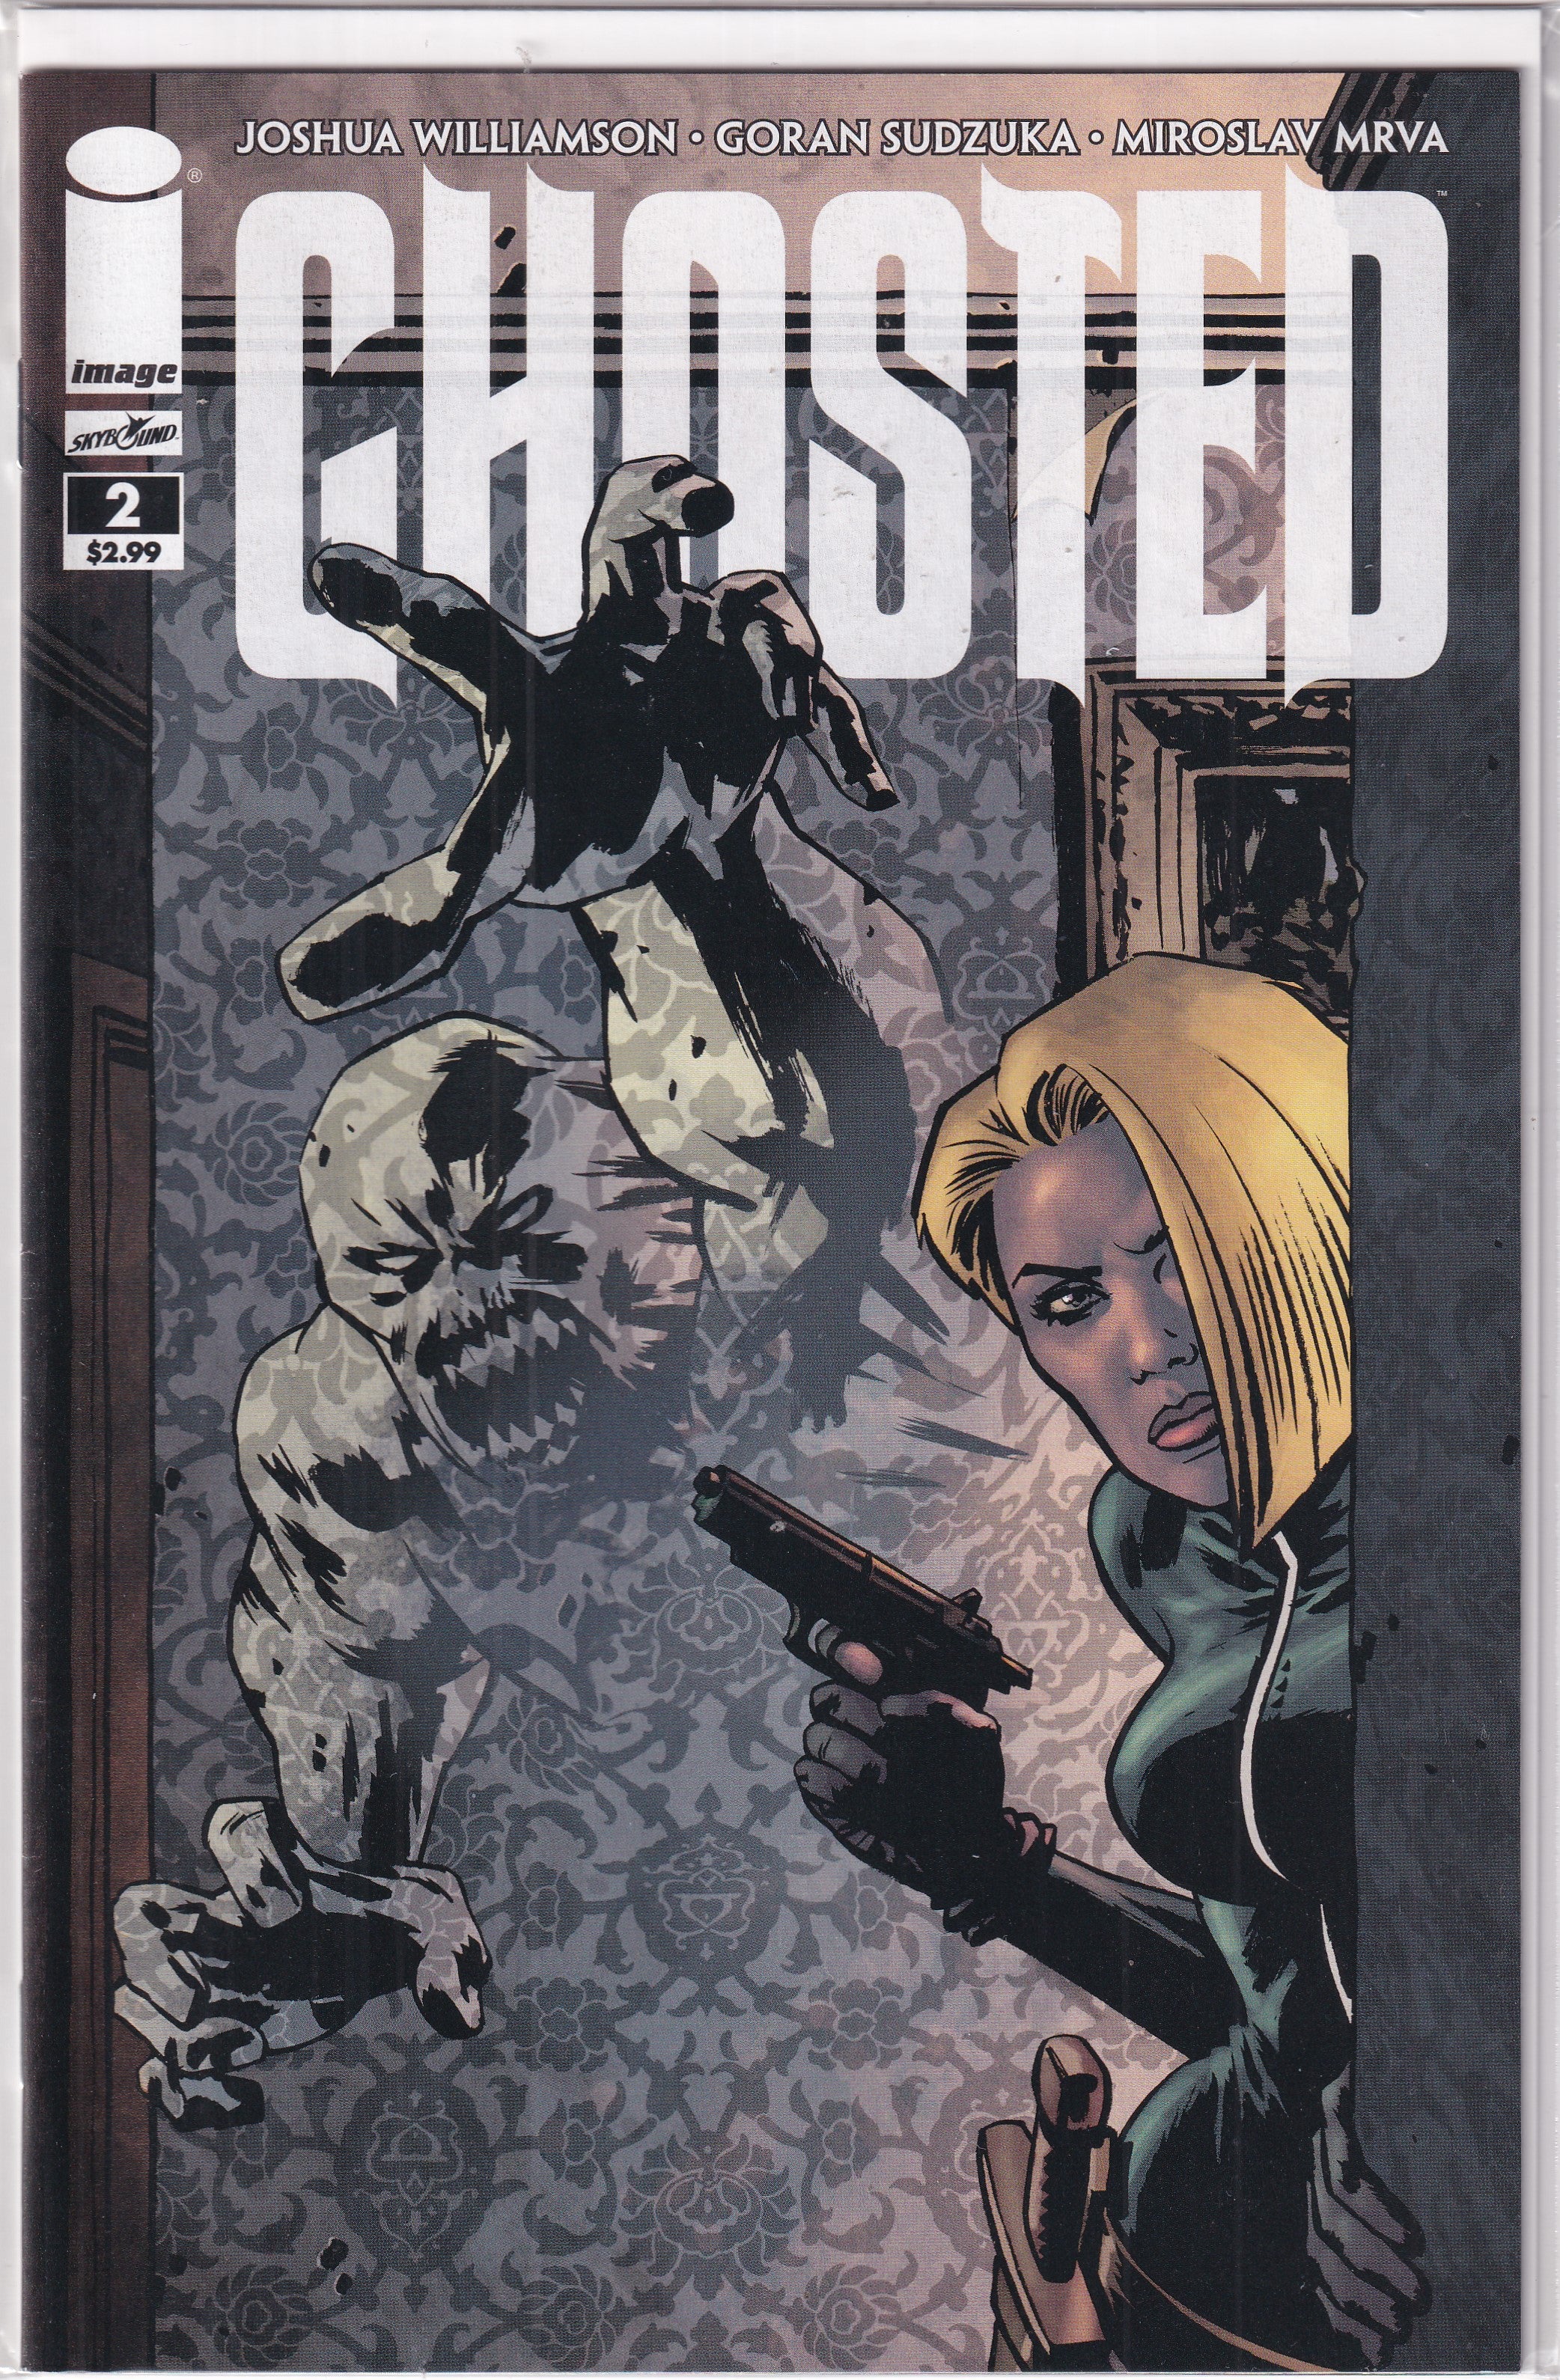 GHOSTED #2 - Slab City Comics 